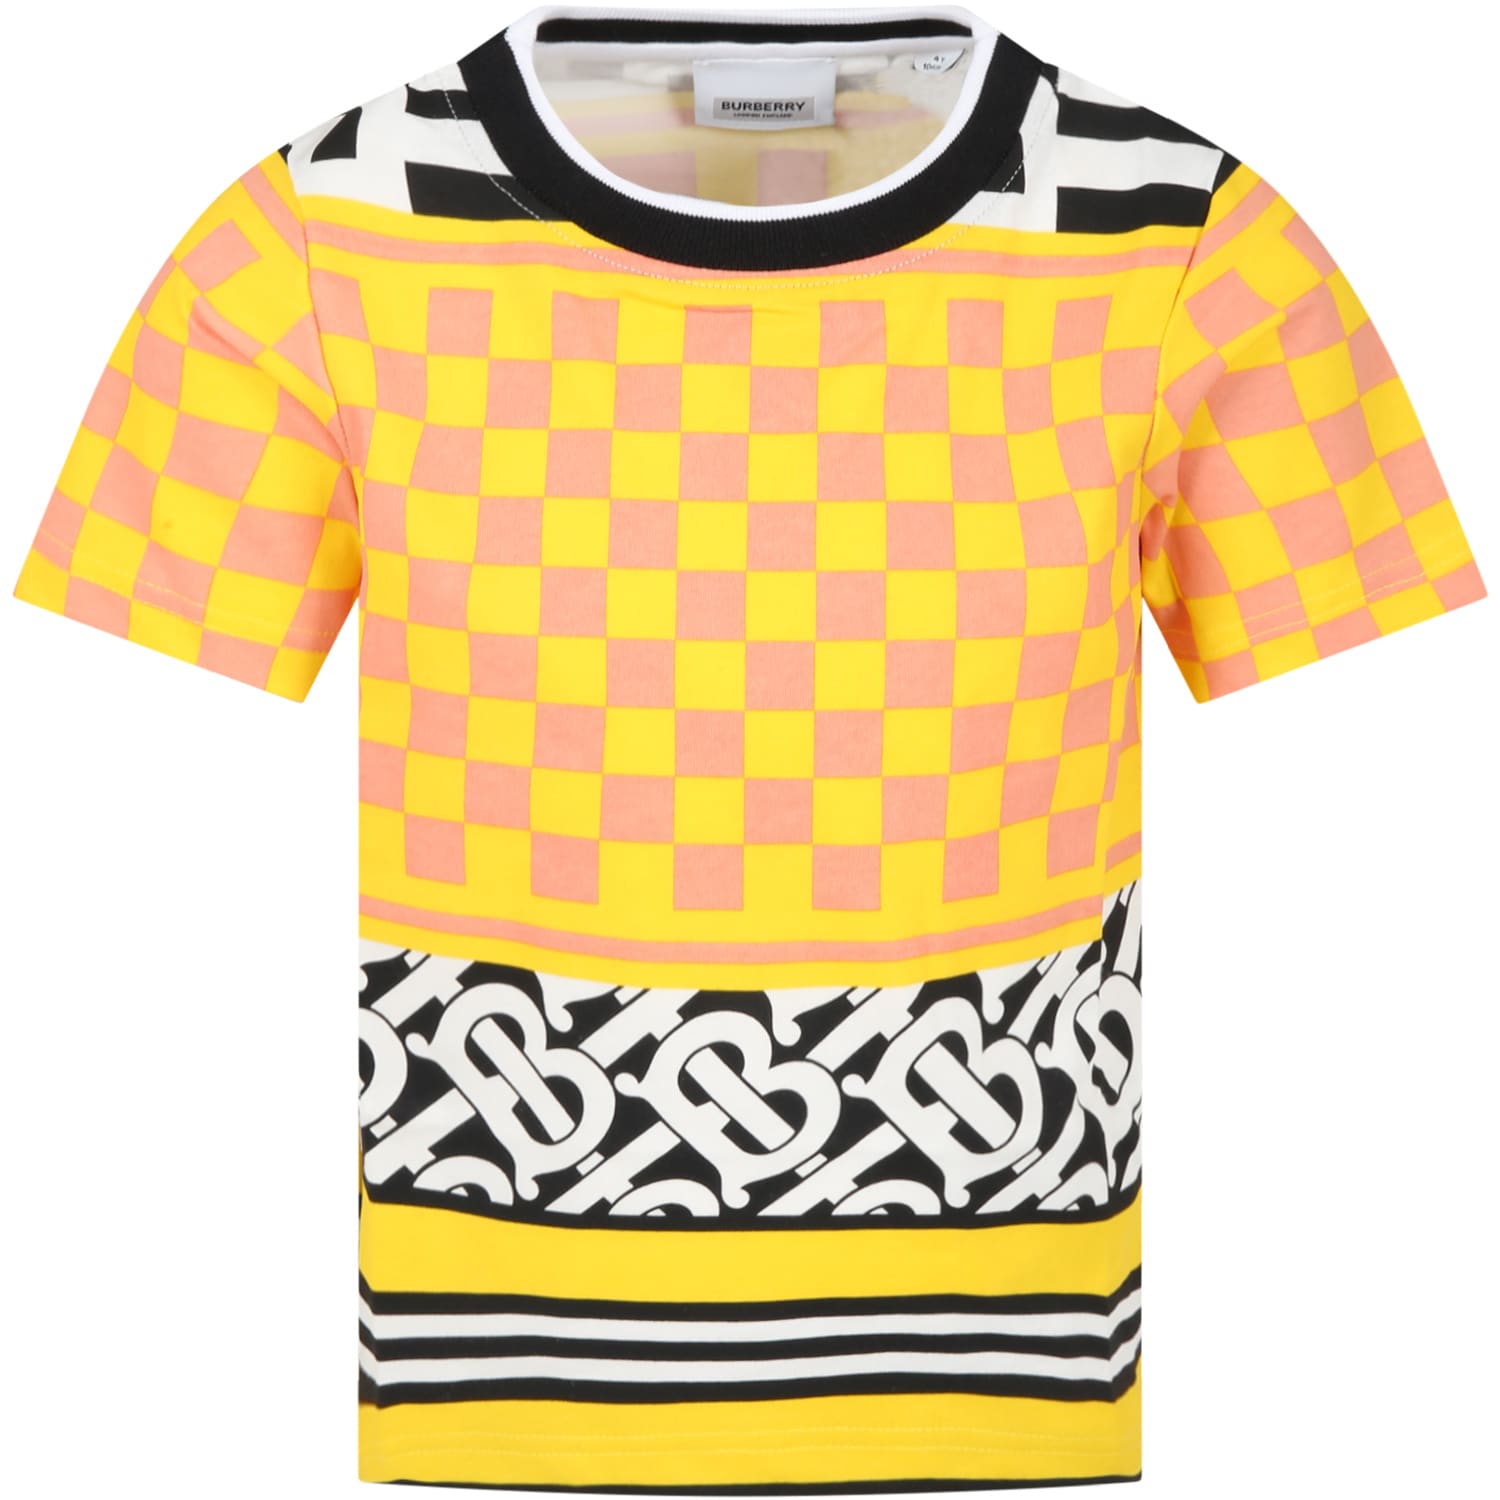 Burberry Multicolor T-shirt For Kids With Iconic Prints